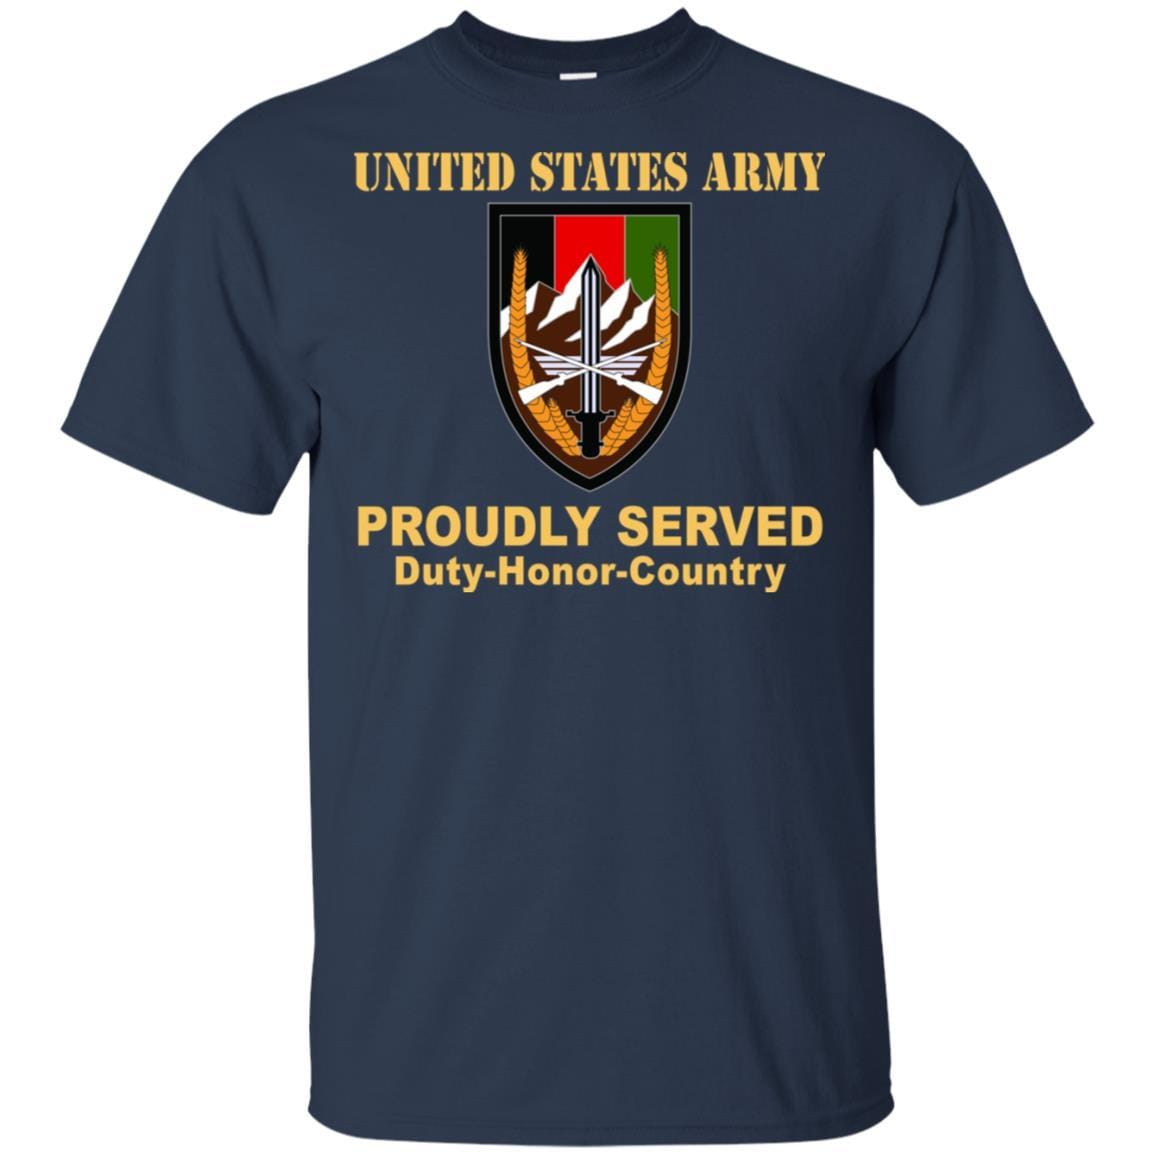 US ARMY CSIB ARMY ELEMENT, UNITED STATES FORCES-AFGHANISTAN- Proudly Served T-Shirt On Front For Men-TShirt-Army-Veterans Nation